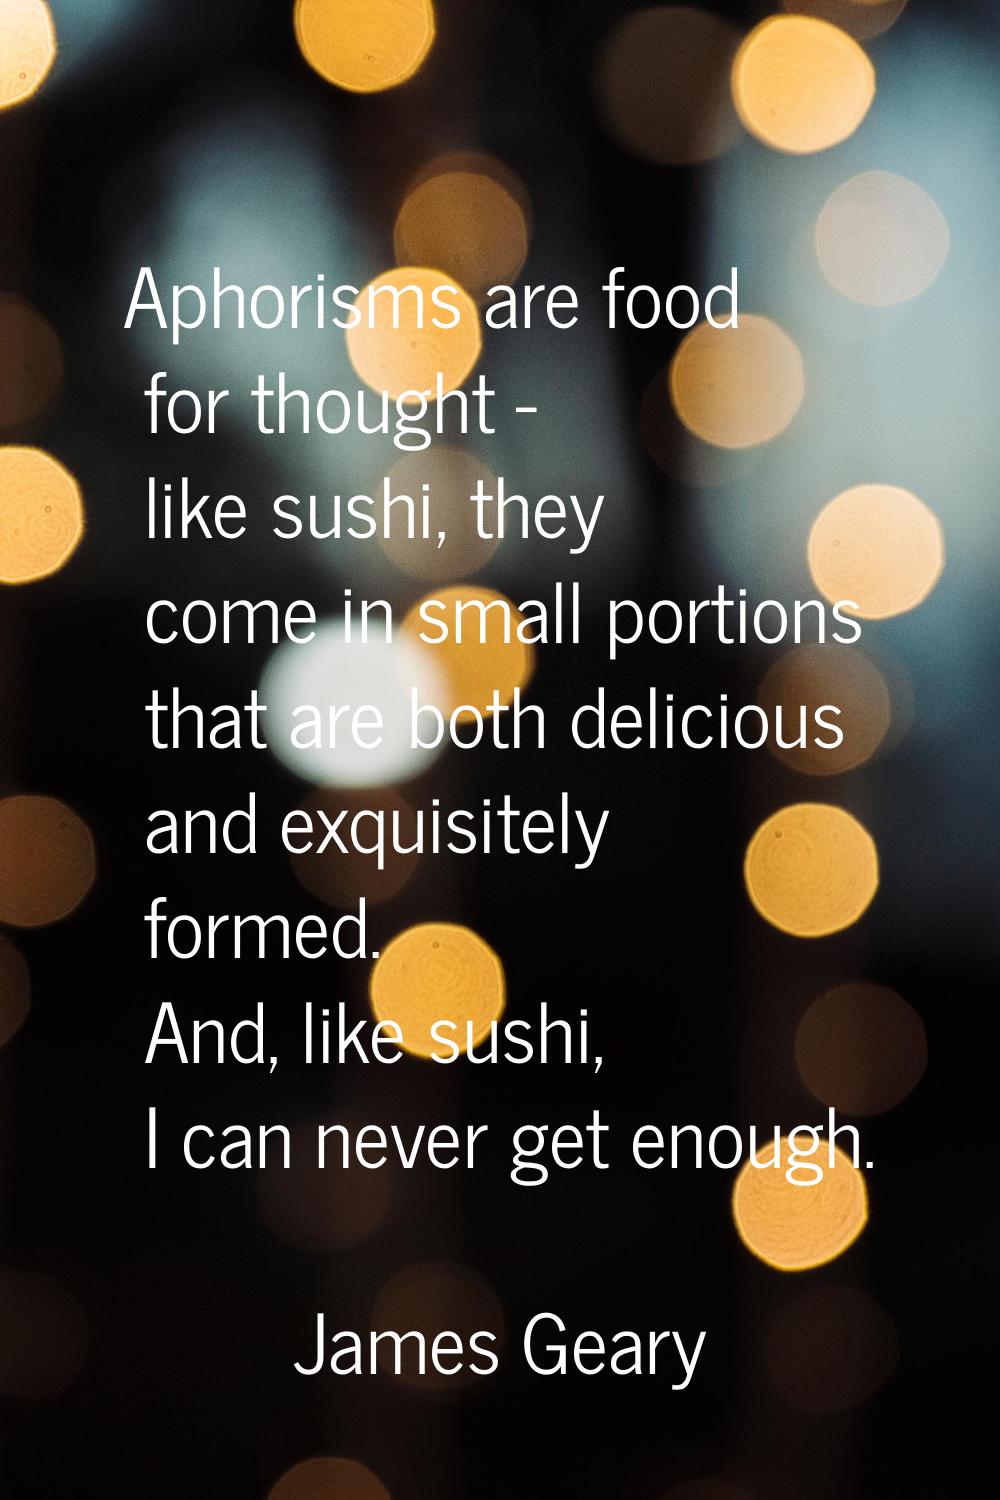 Aphorisms are food for thought - like sushi, they come in small portions that are both delicious an